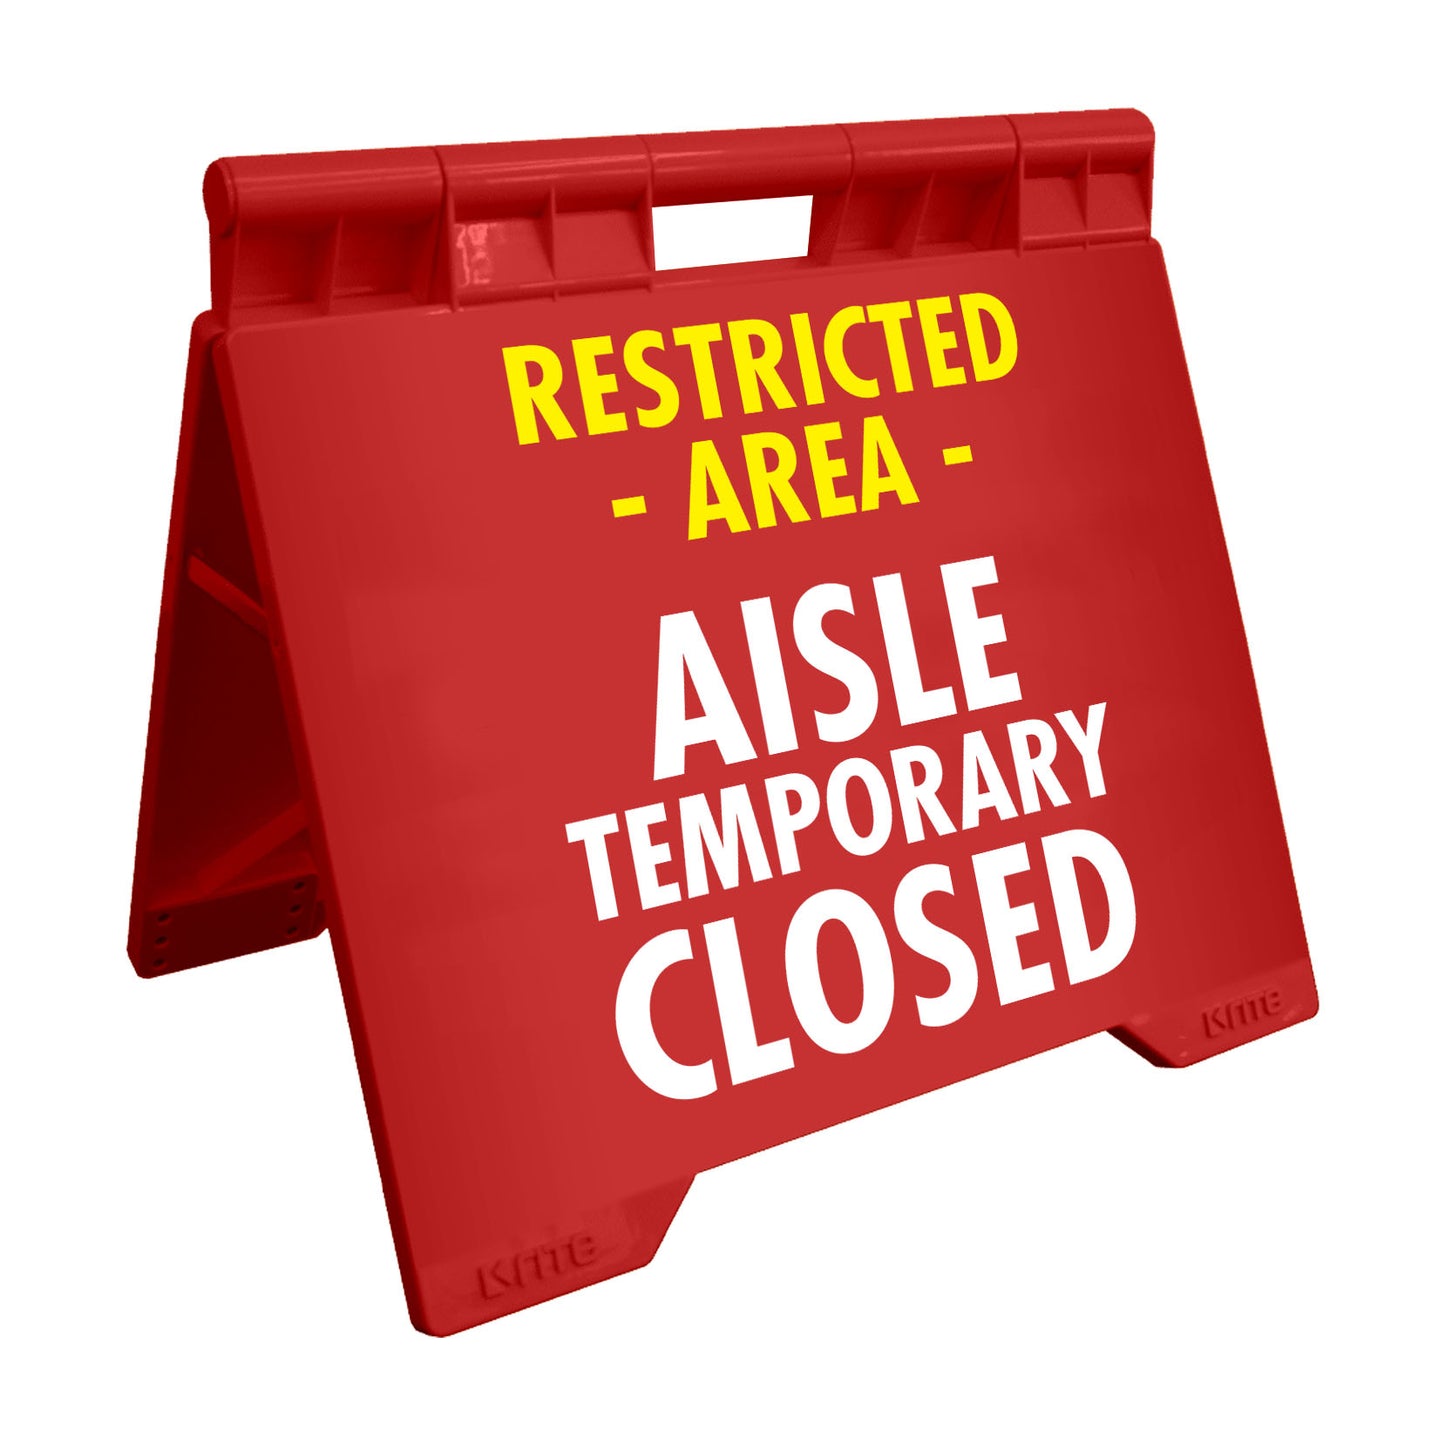 Restricted Area Aisle Temporary Closed - Evarite A-Frame Sign